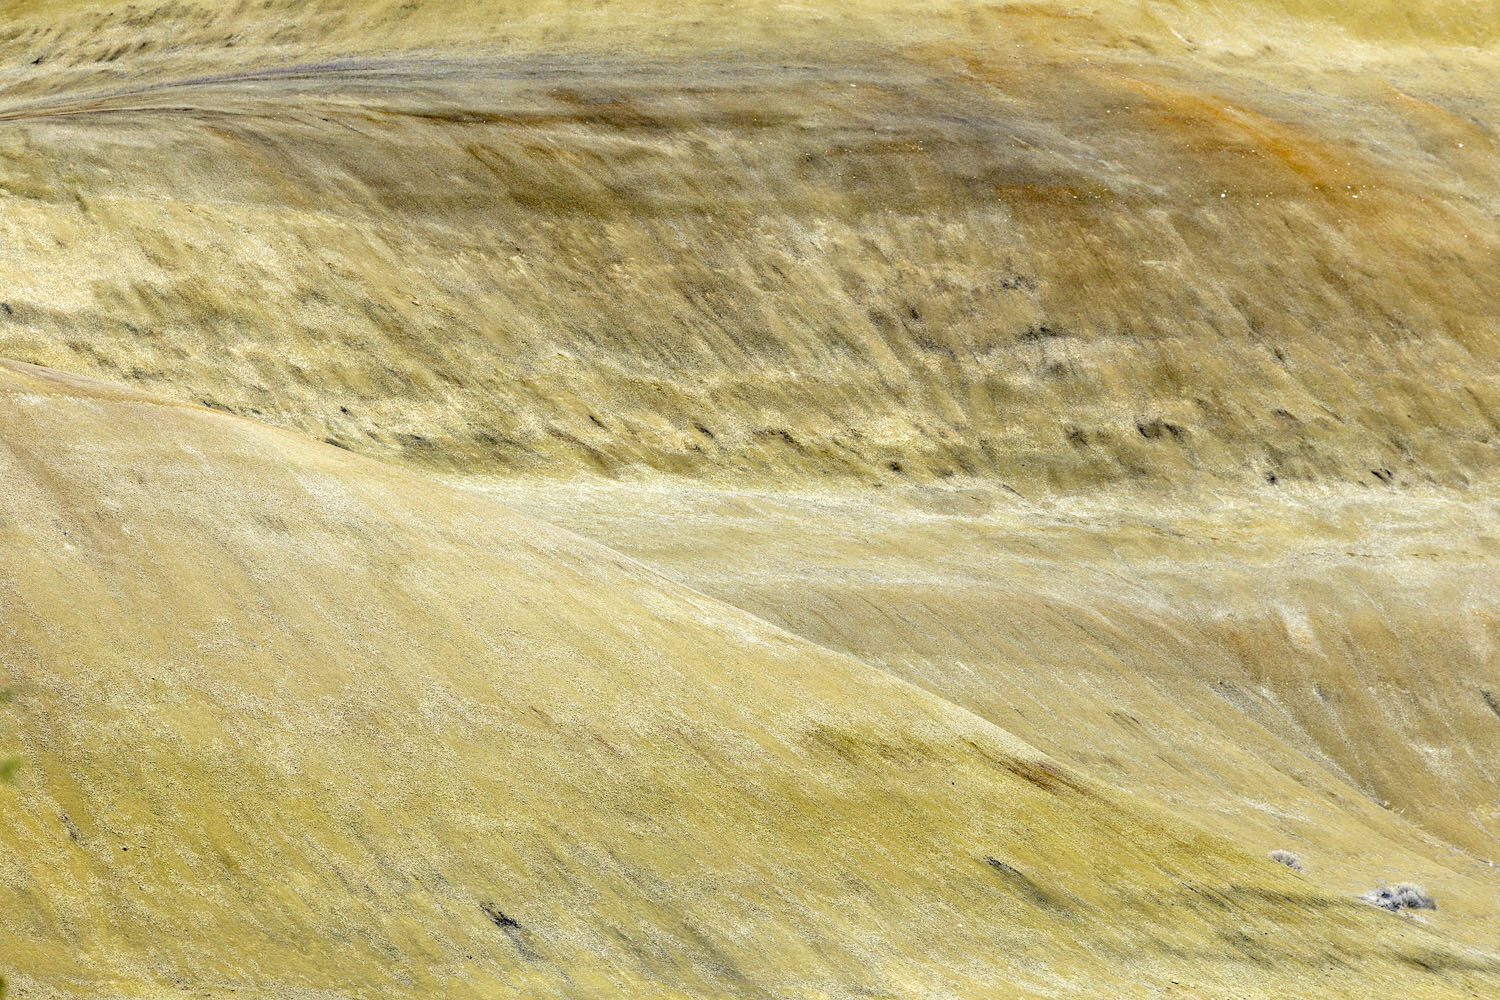 Painted Hills #4. John Day Fossil Beds National Monument, OR. 2016